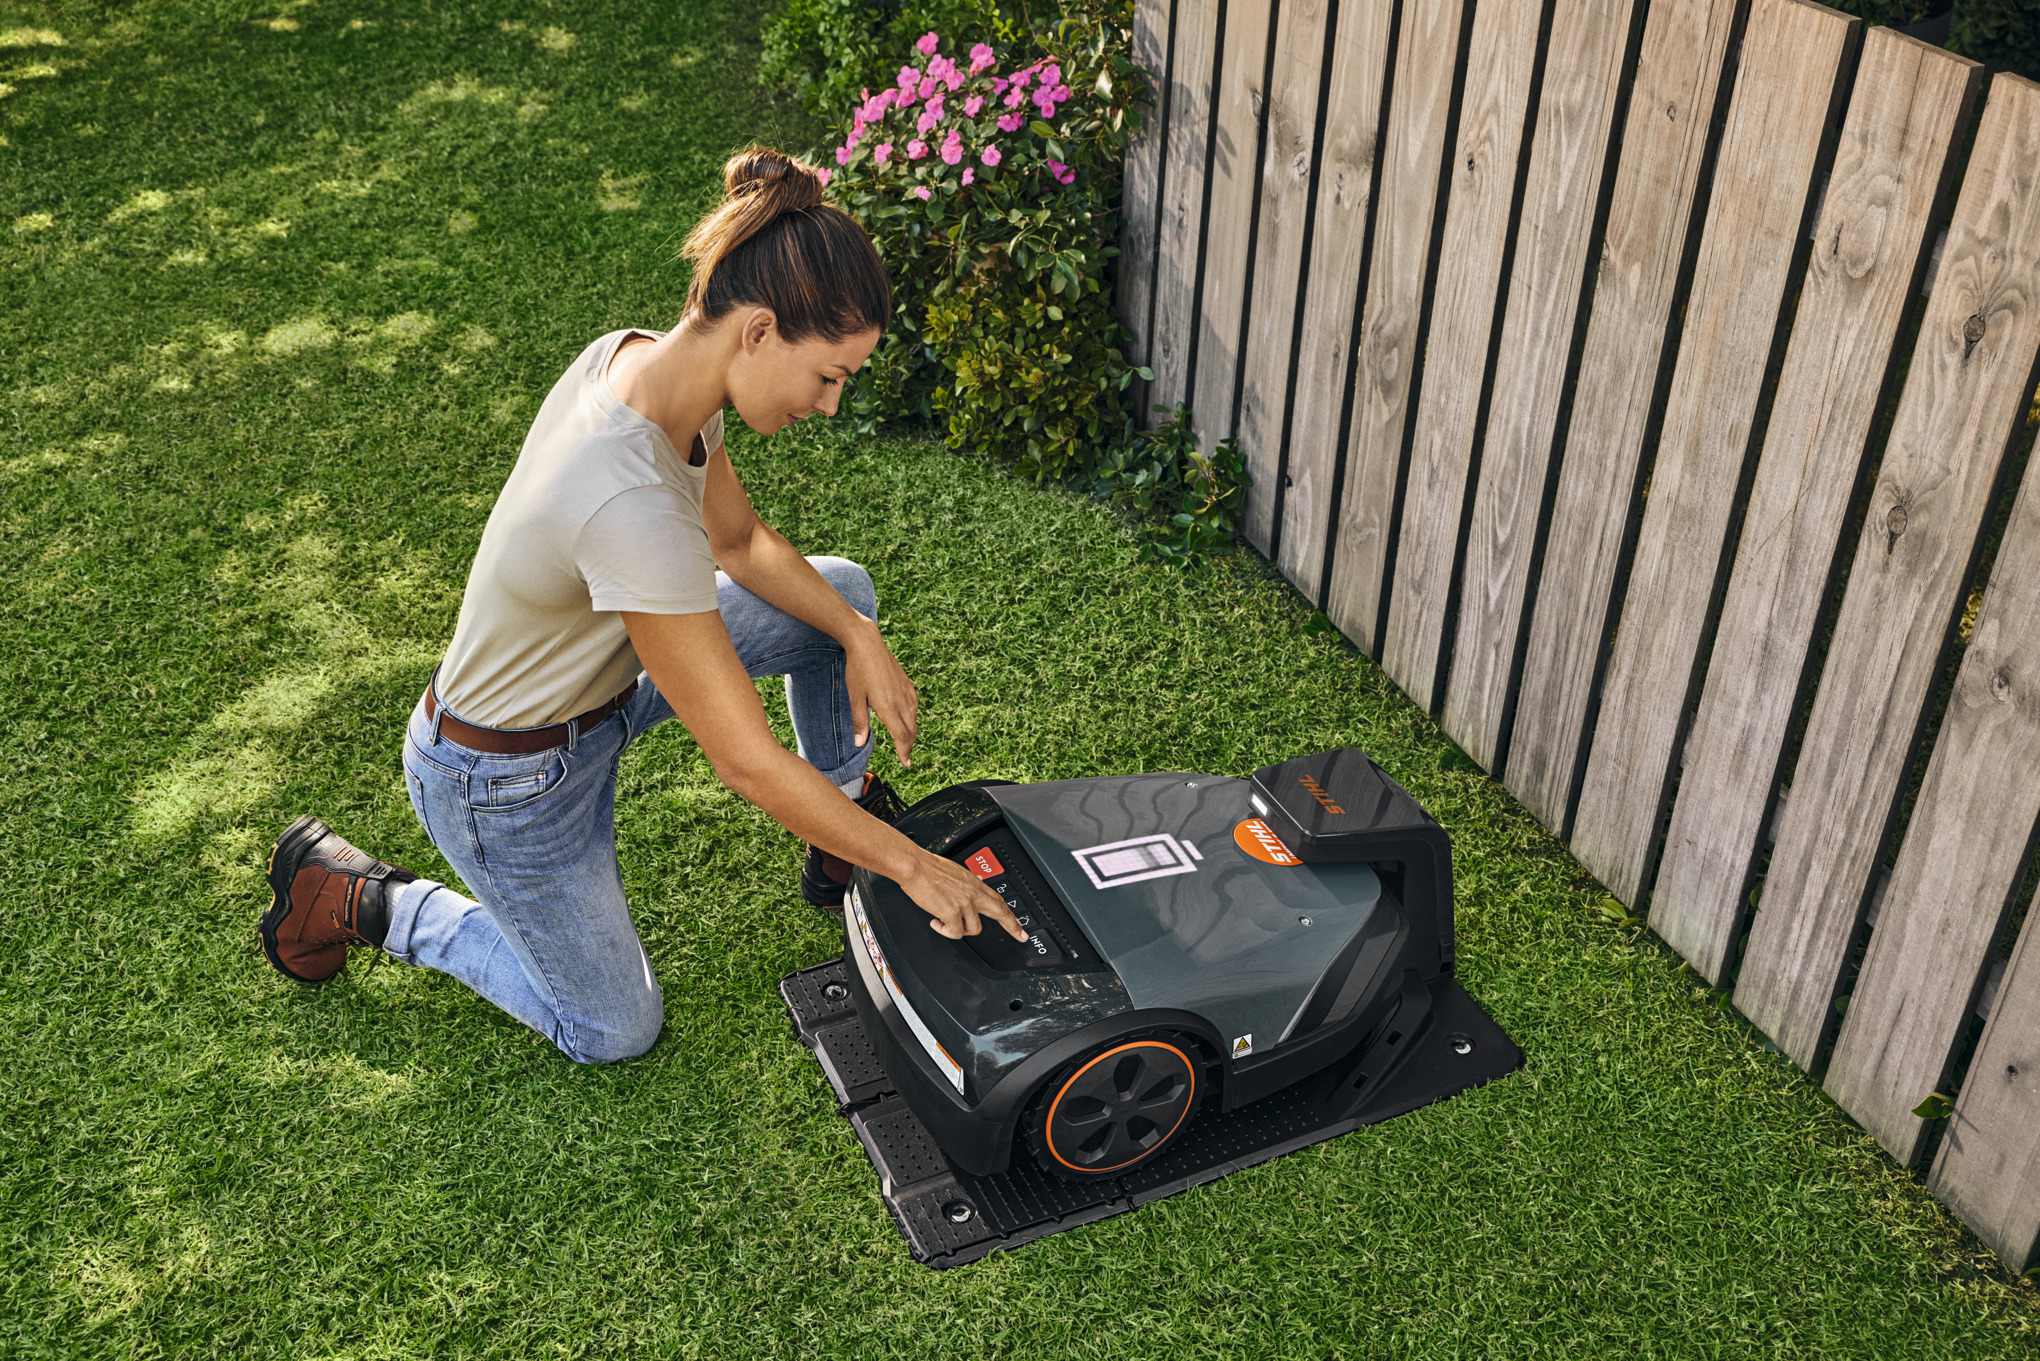 STIHL iMOW® robotic lawnmower in its docking station in the garden while a woman adjusts something on the robotic lawnmower.